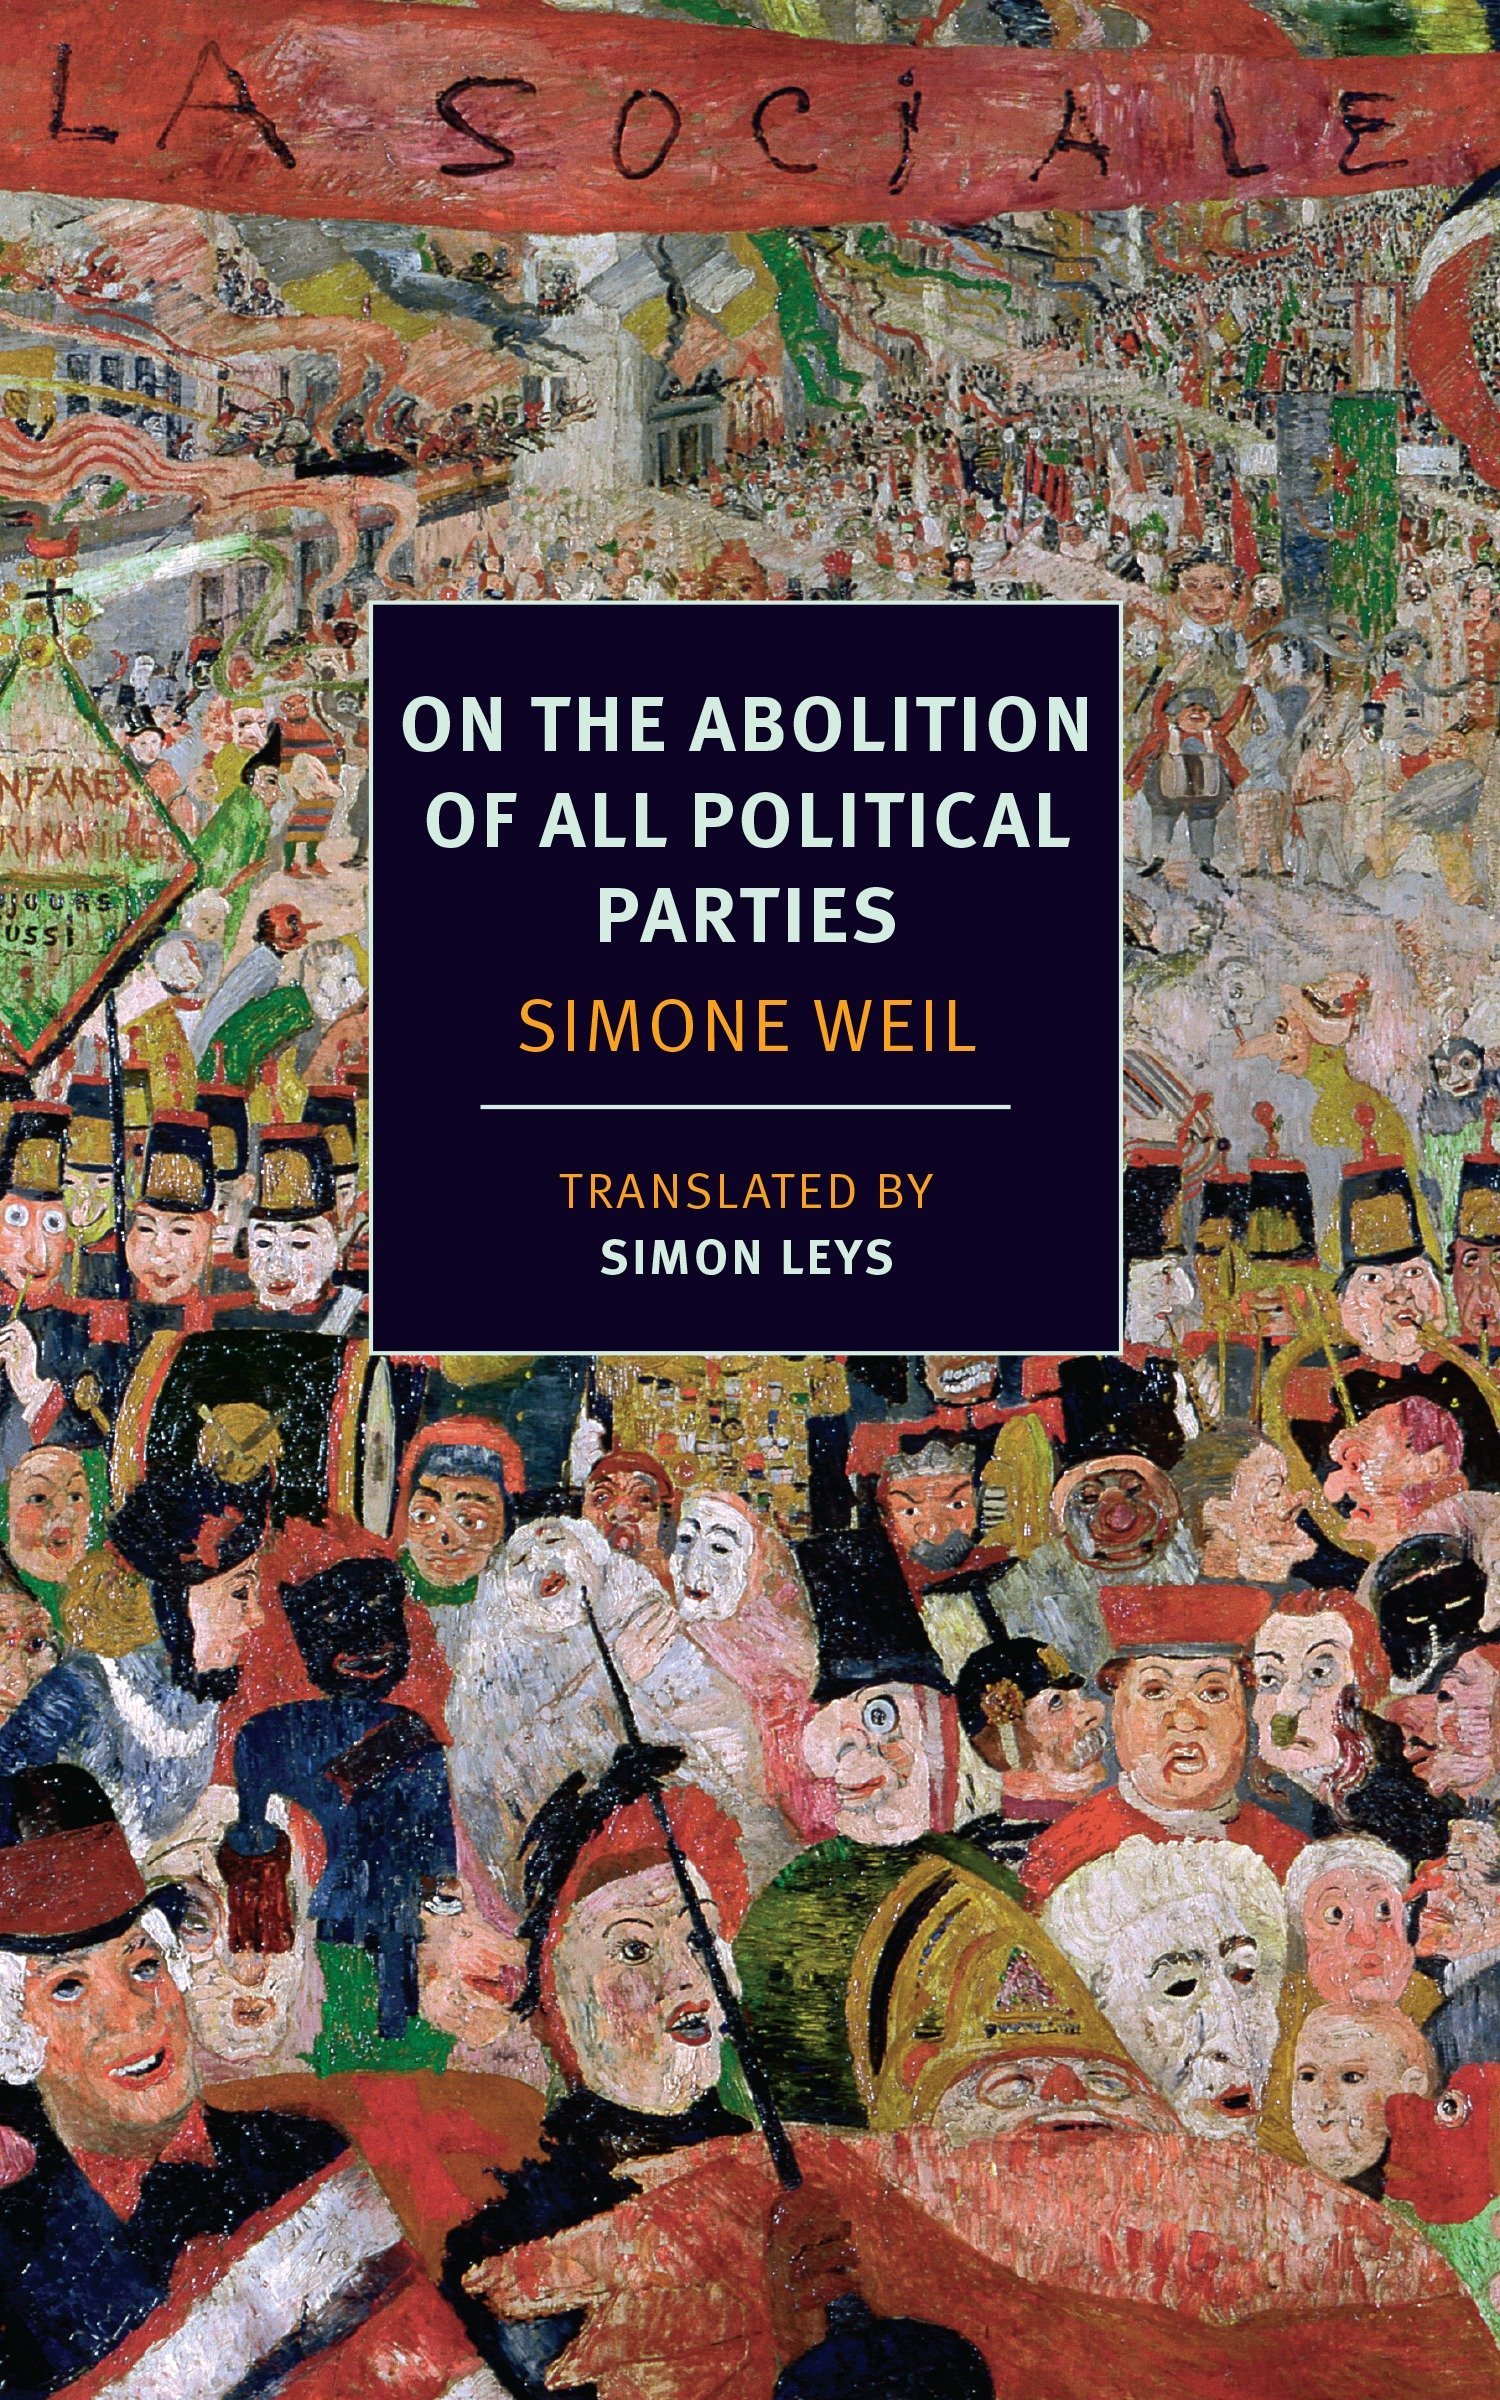 Simone Weil, Simon Leys, Czeslaw Milosz: On the Abolition of All Political Parties (2014, New York Review of Books, Incorporated, The)